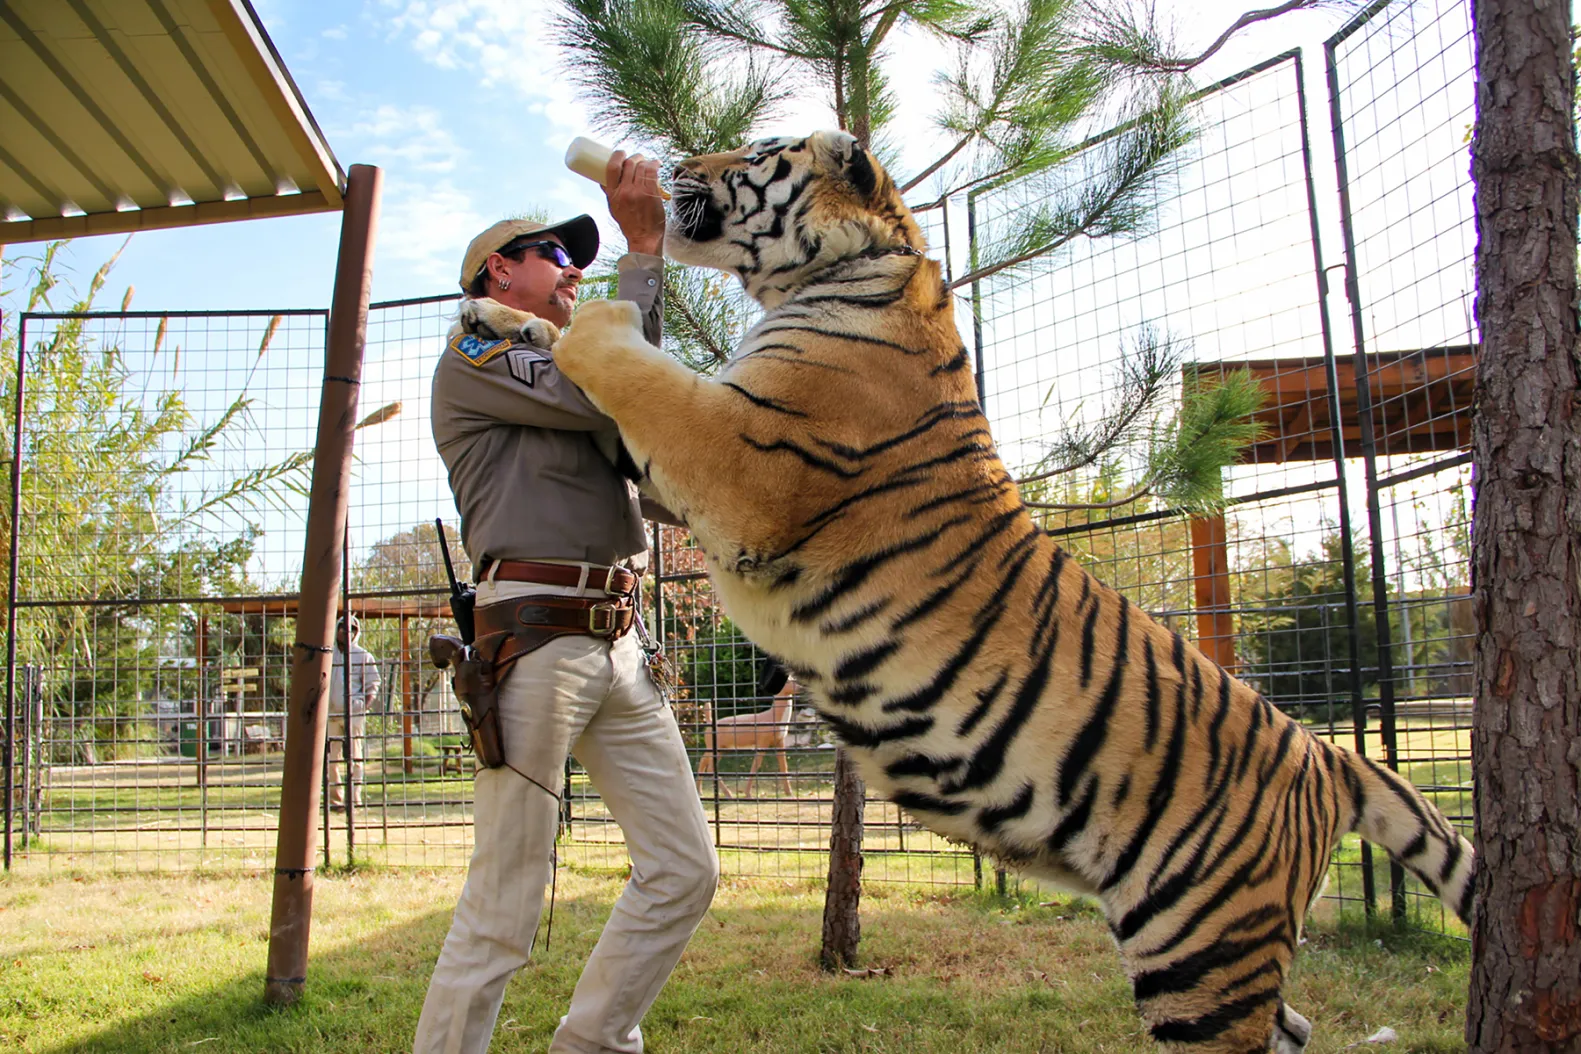 Tiger playing with the tiger king